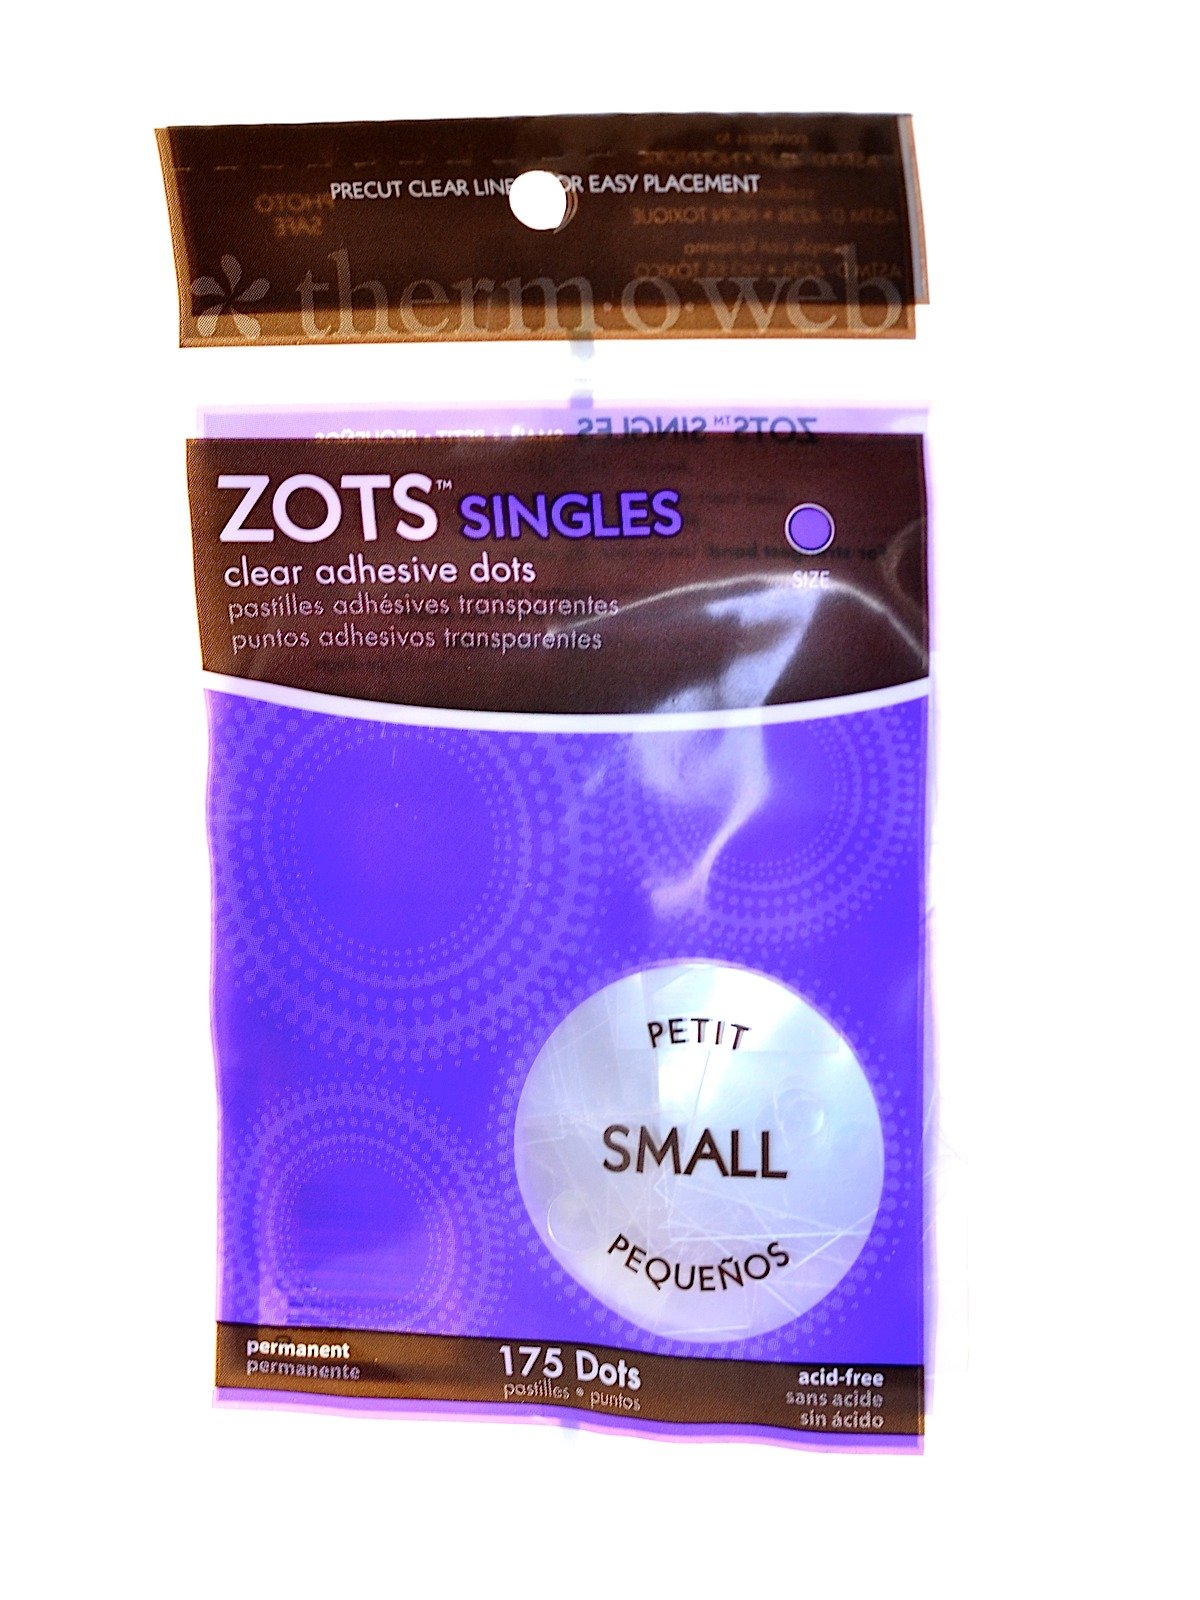 Zots Clear Adhesive Dots 3/16 in., small dots, pack of 175